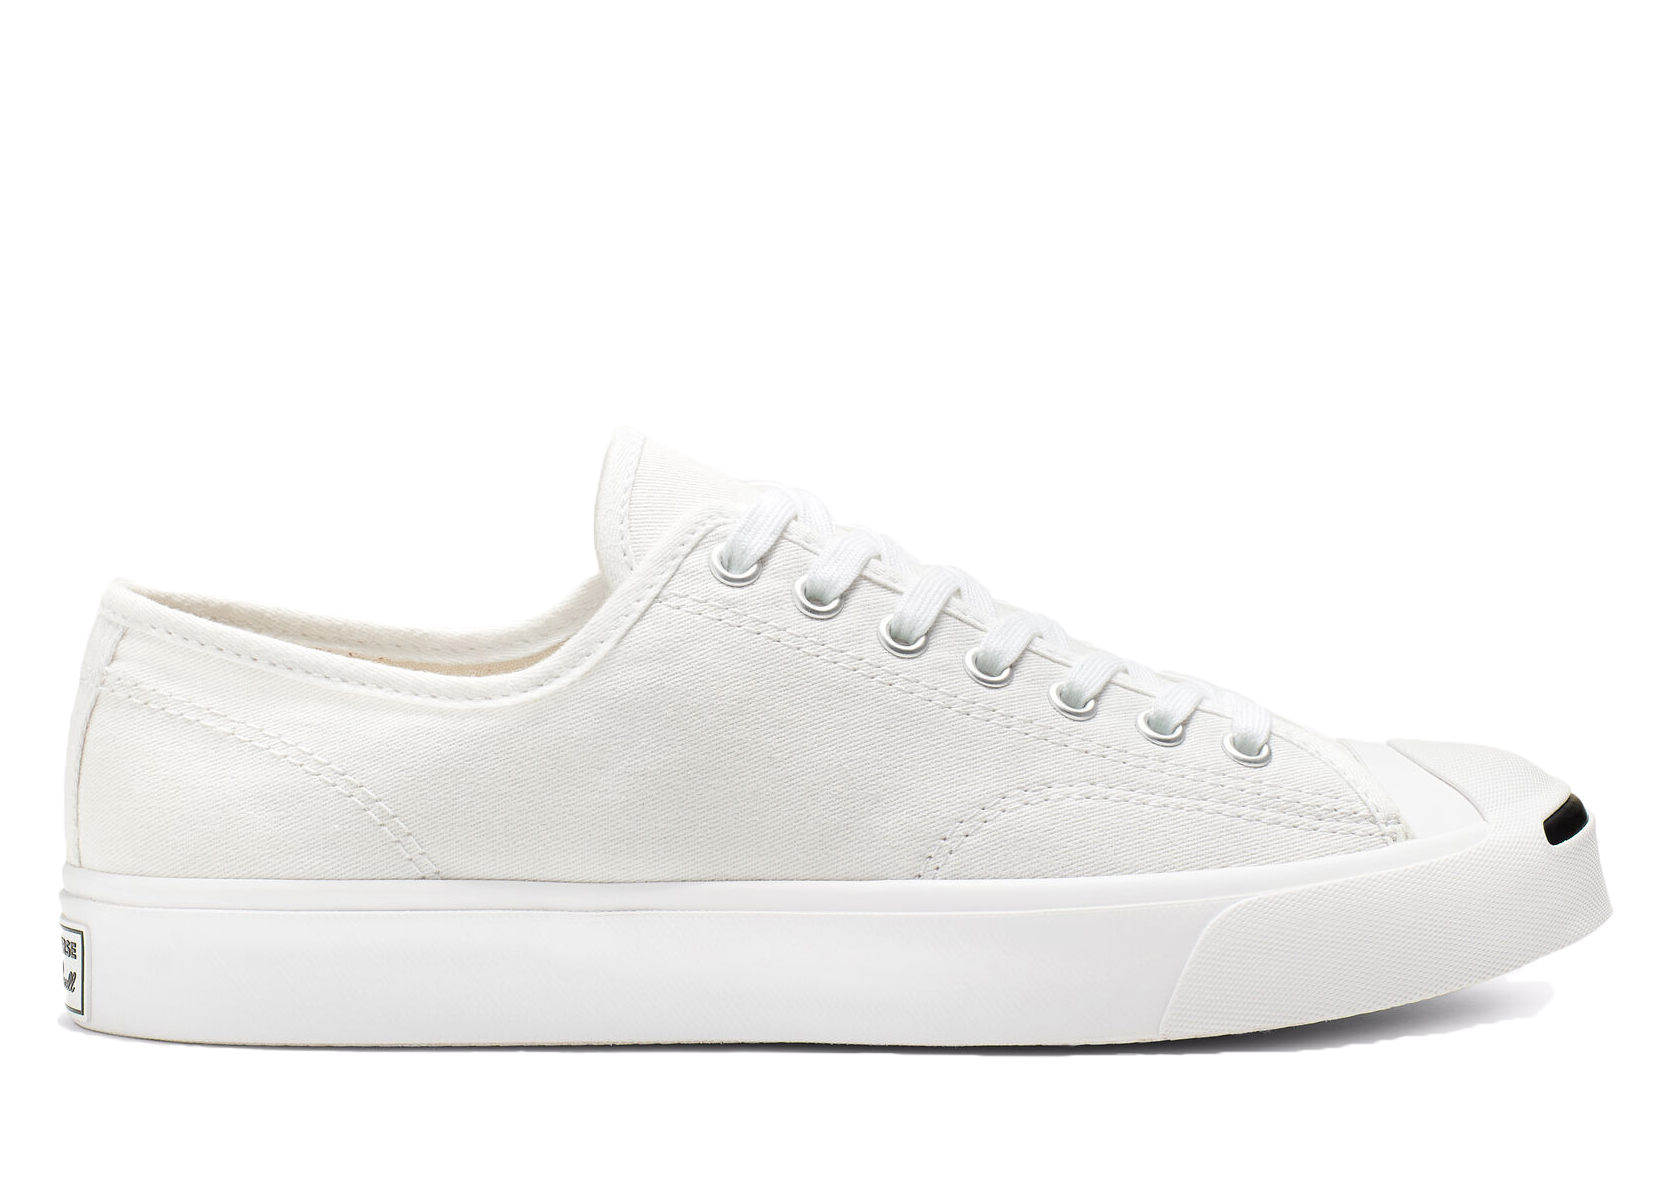 Converse Jack Purcell Canvas Low White جهاز قياس الوزن